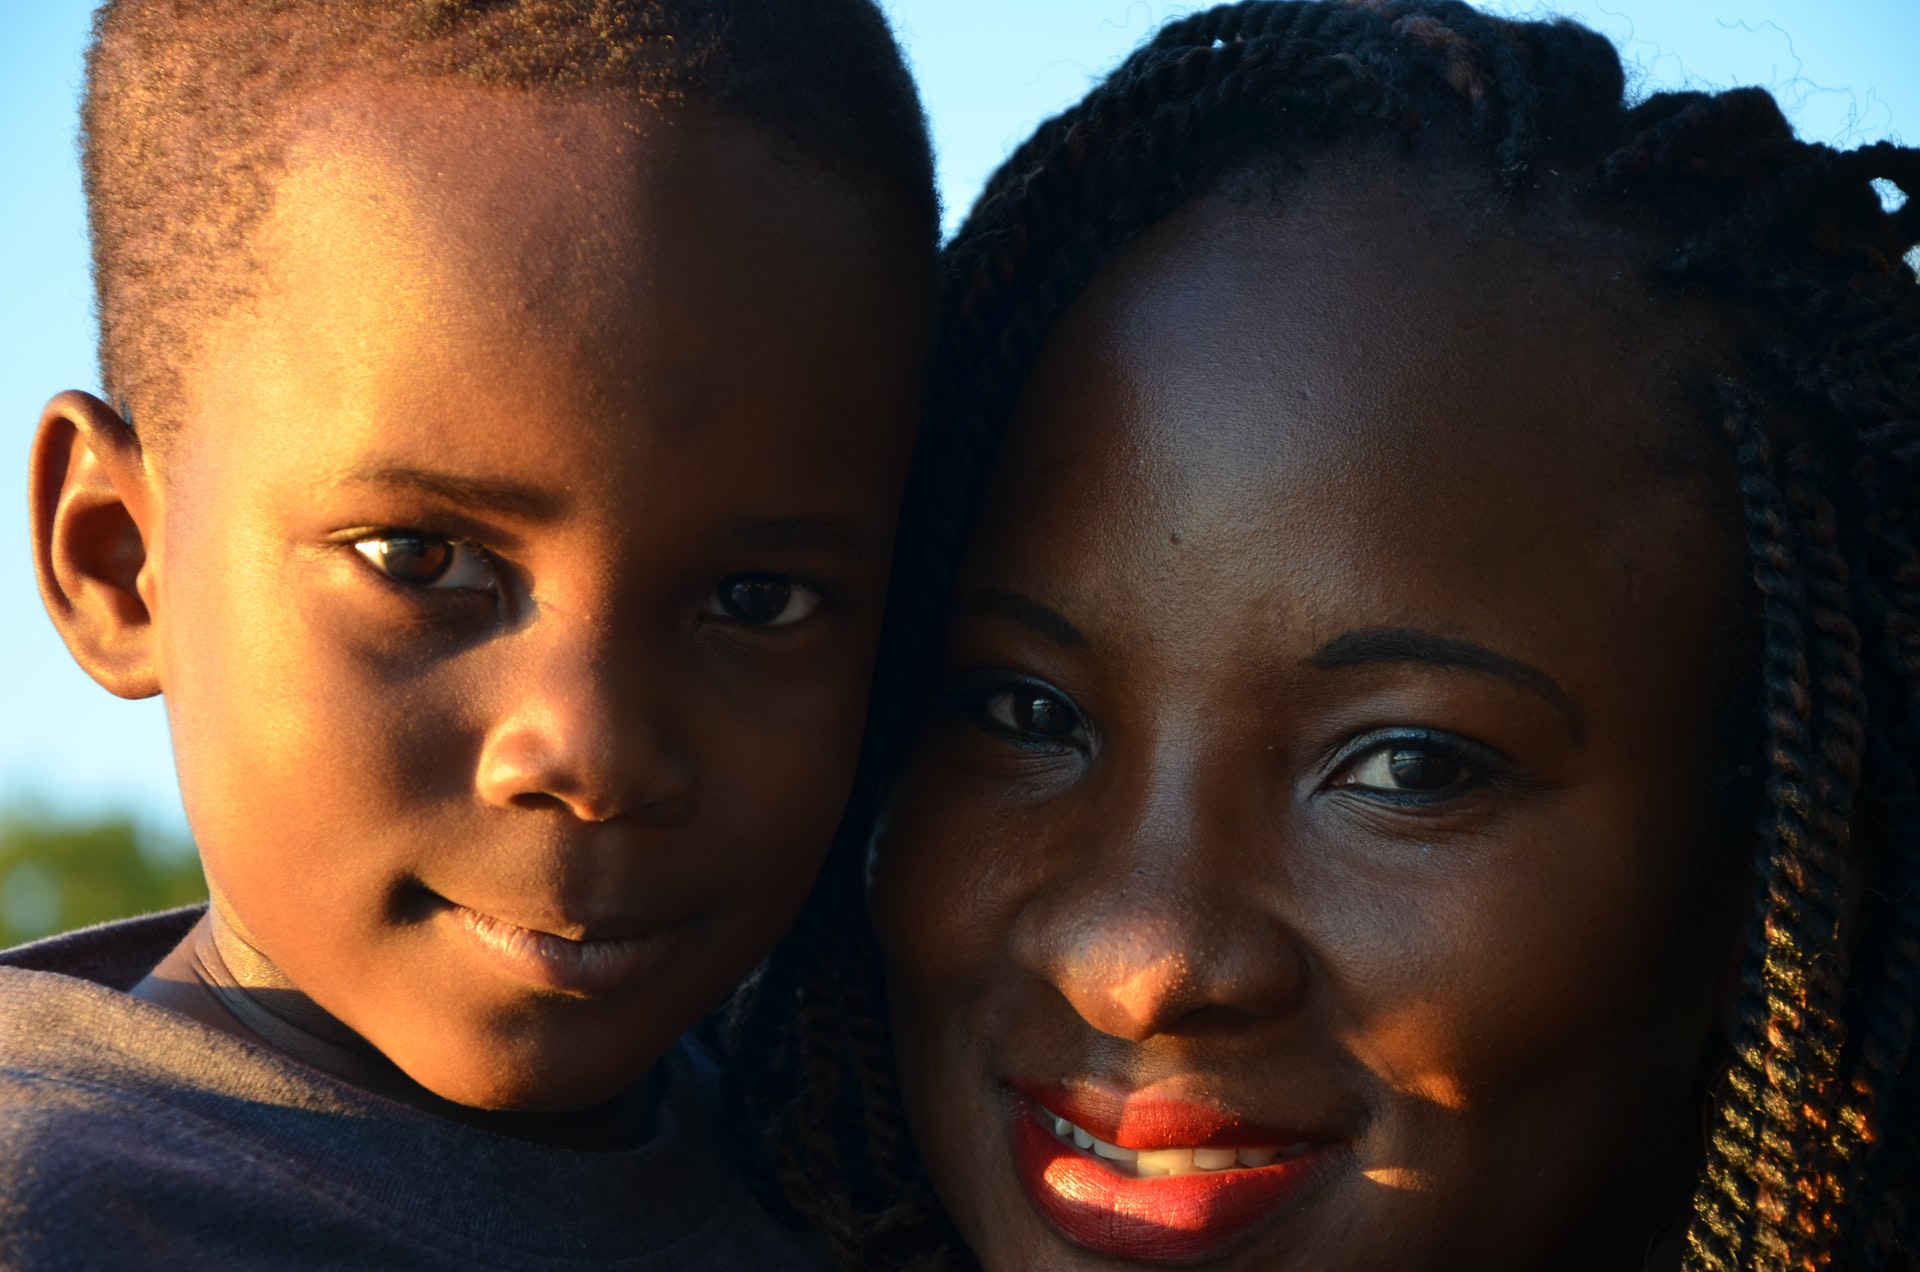 A young boy and woman smile at the camera.